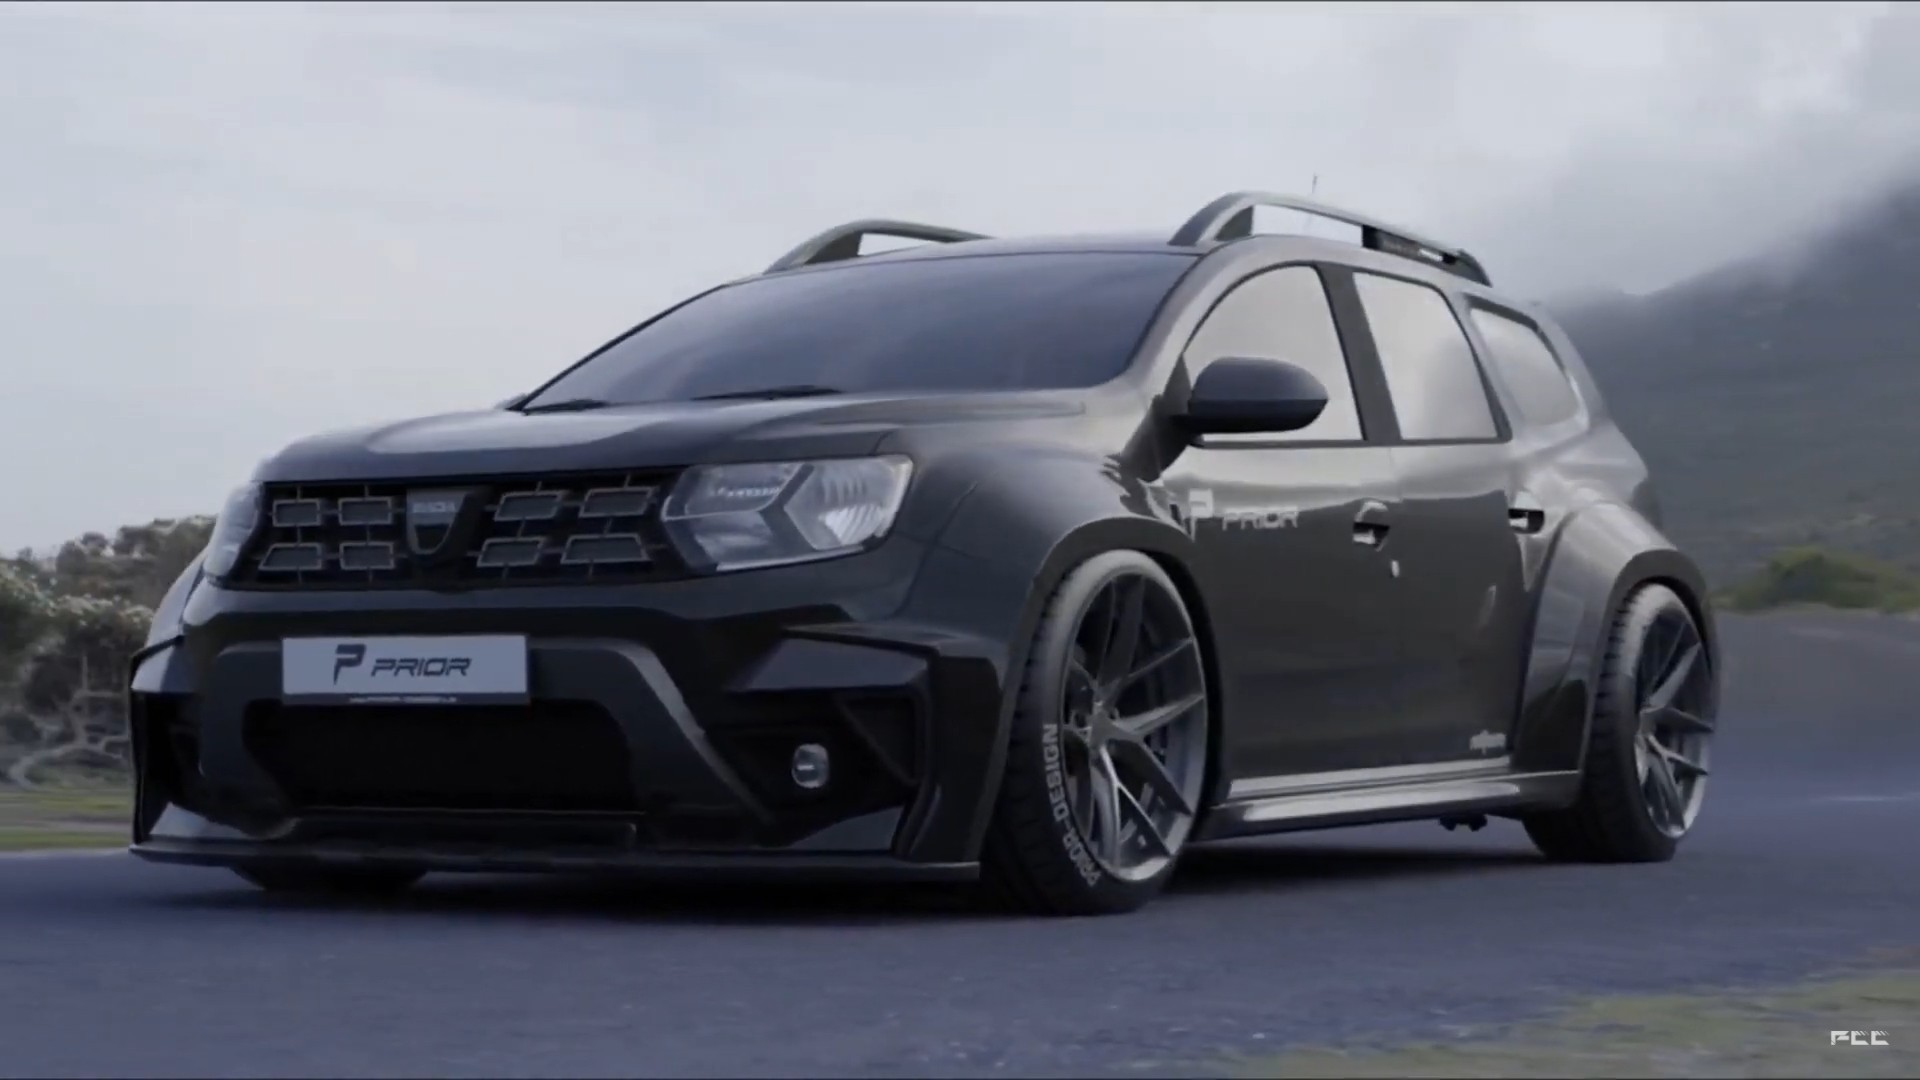 Dacia Duster - Tuning The Dacia Duster project was born out of